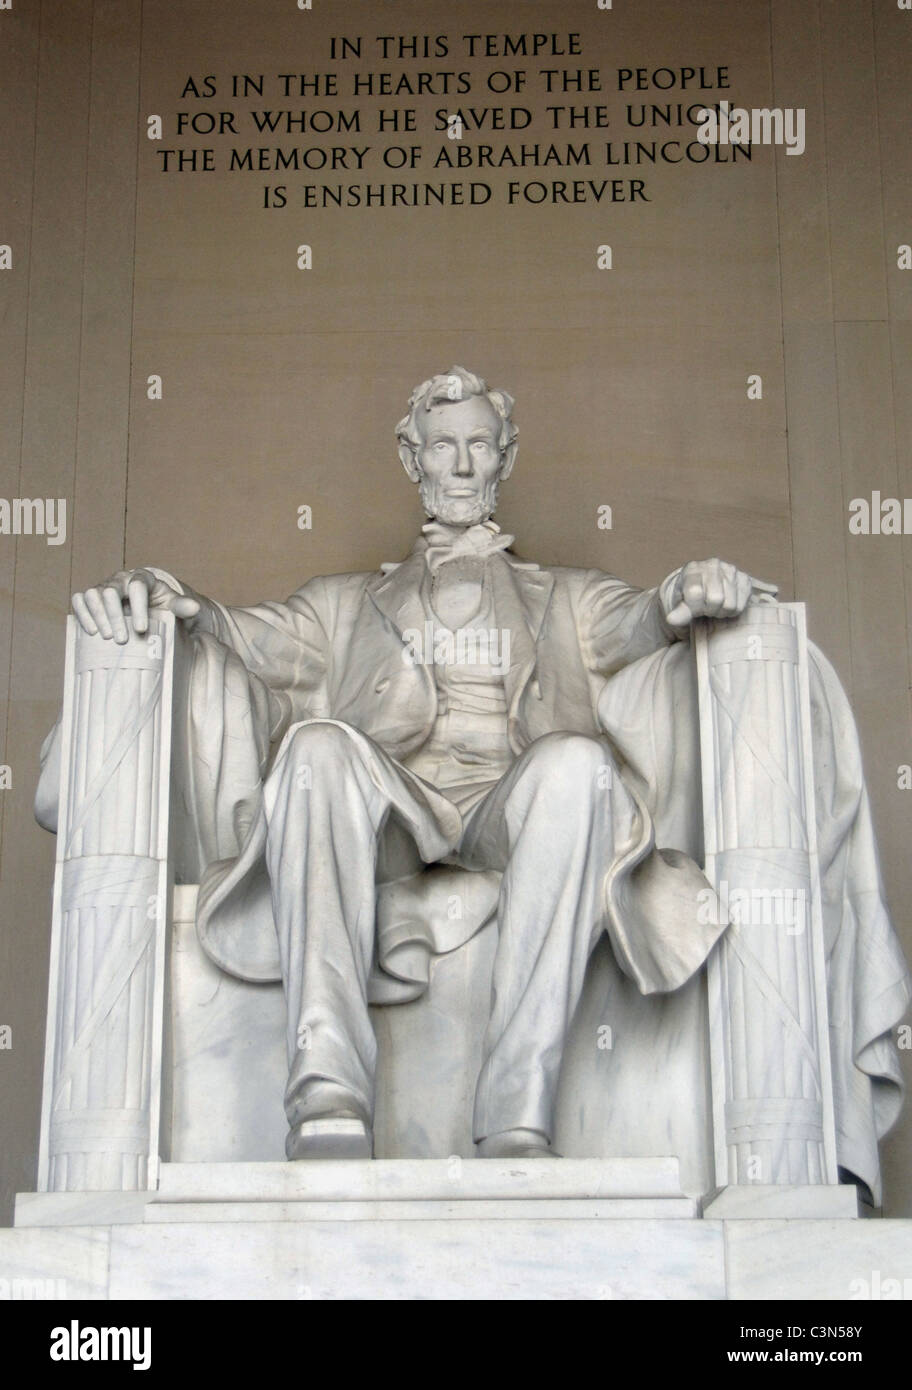 Abraham Lincoln (1809-1865). President in 1860. Monumental statue (1920). Lincoln Memorial. Washington D.C. United States. Stock Photo